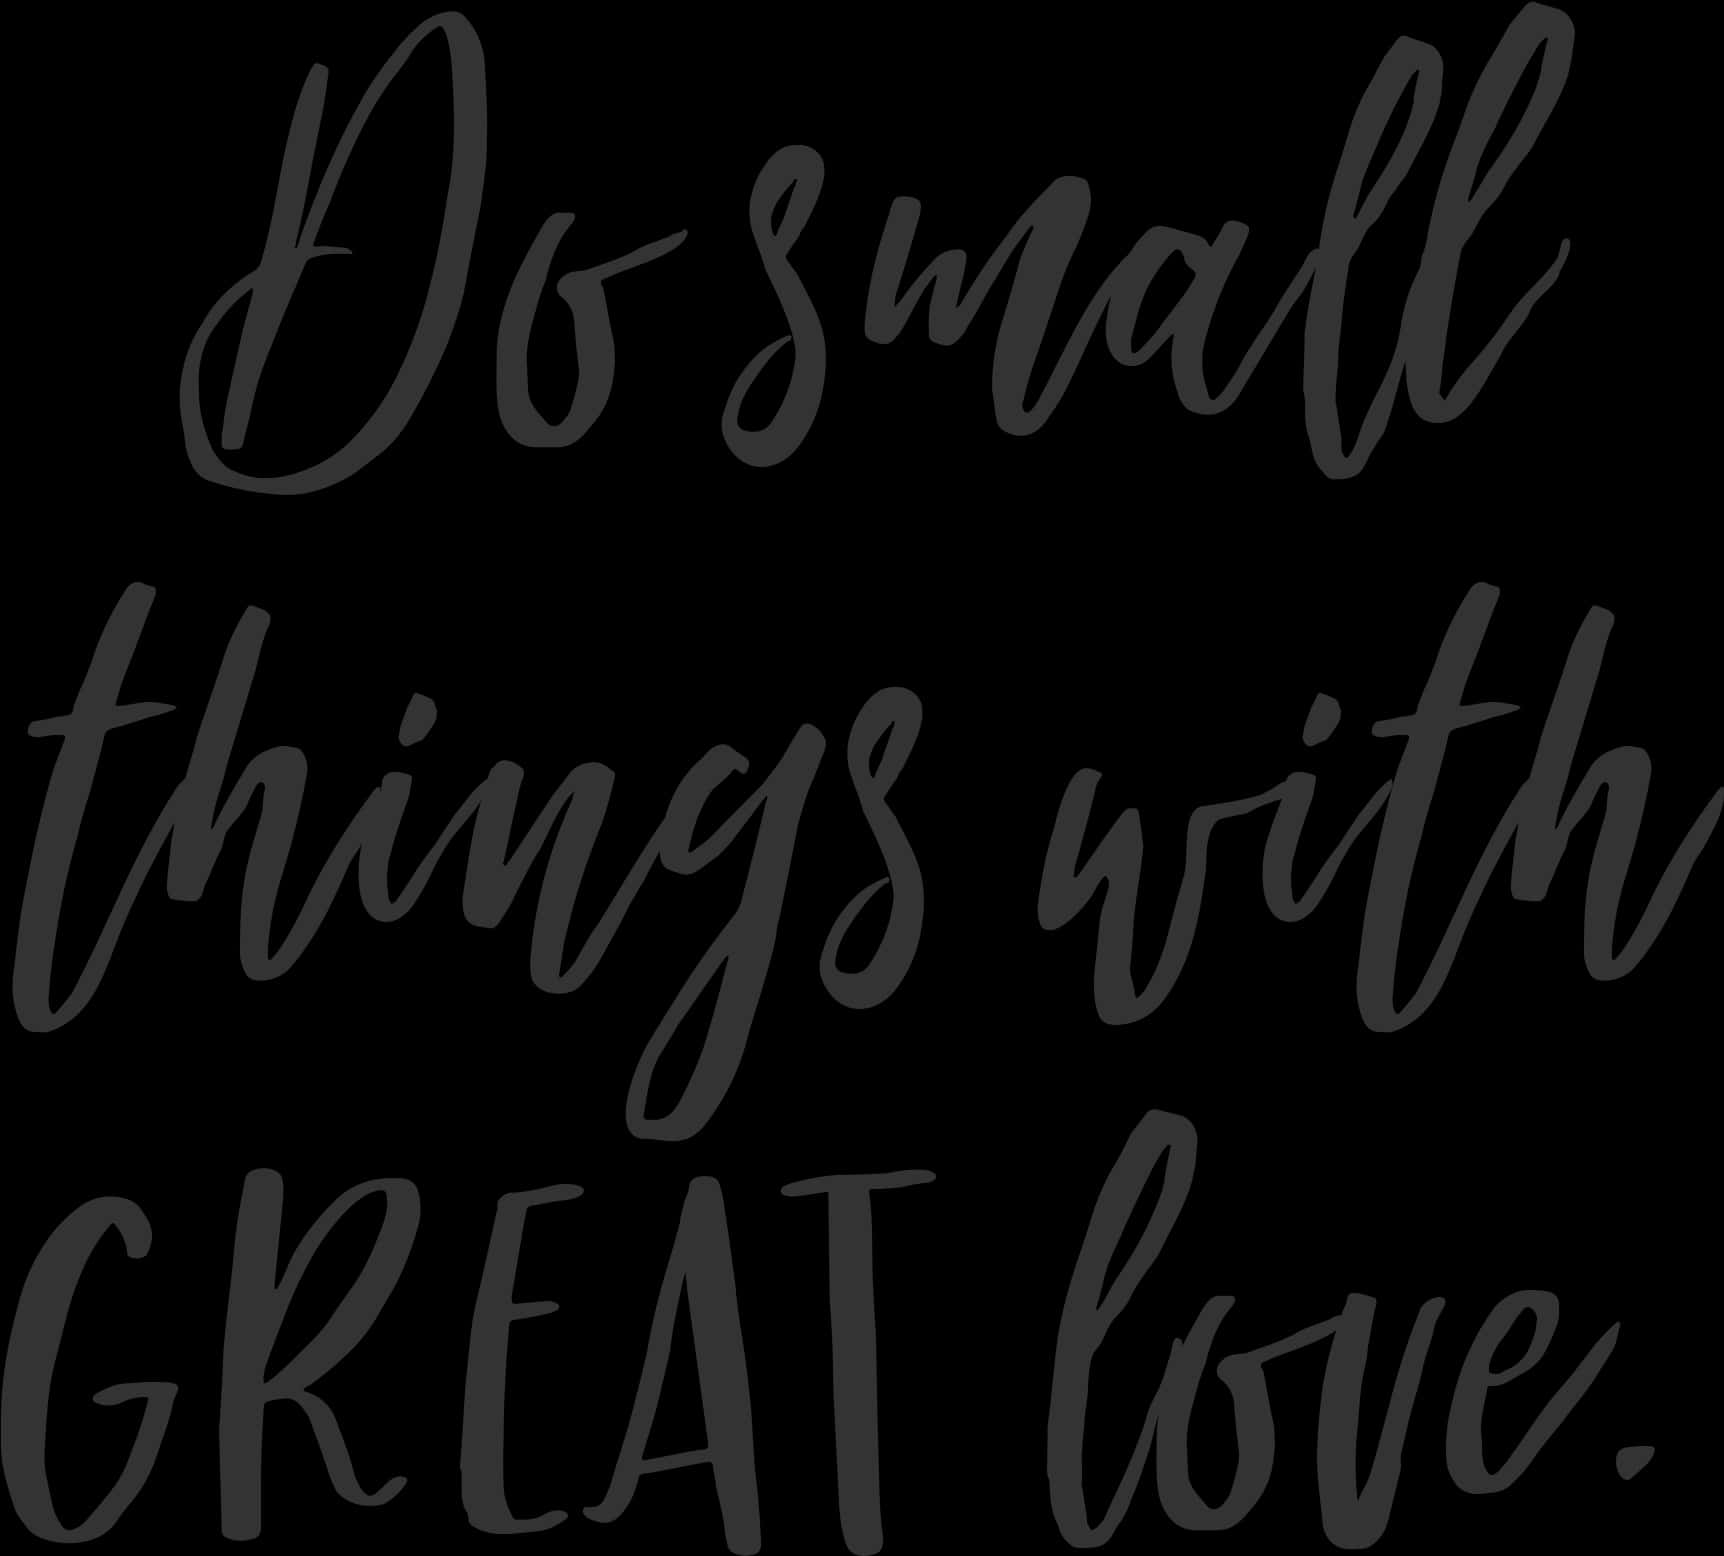 Inspirational Love Quote Do Small Things